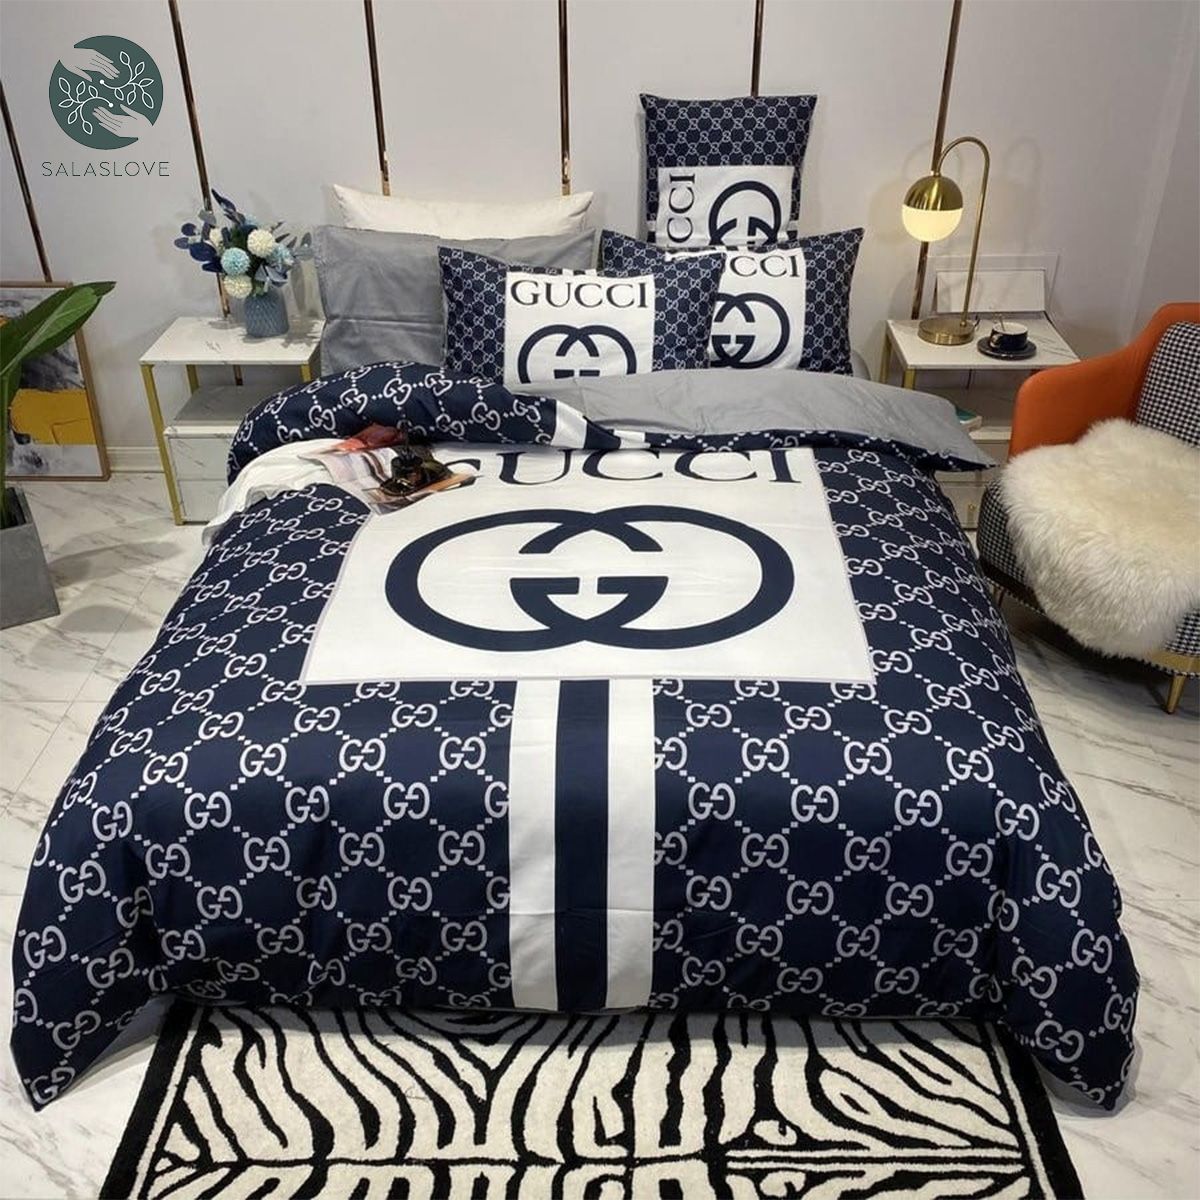 Gucci Luxury Brand Limited Edition Bedding Sets